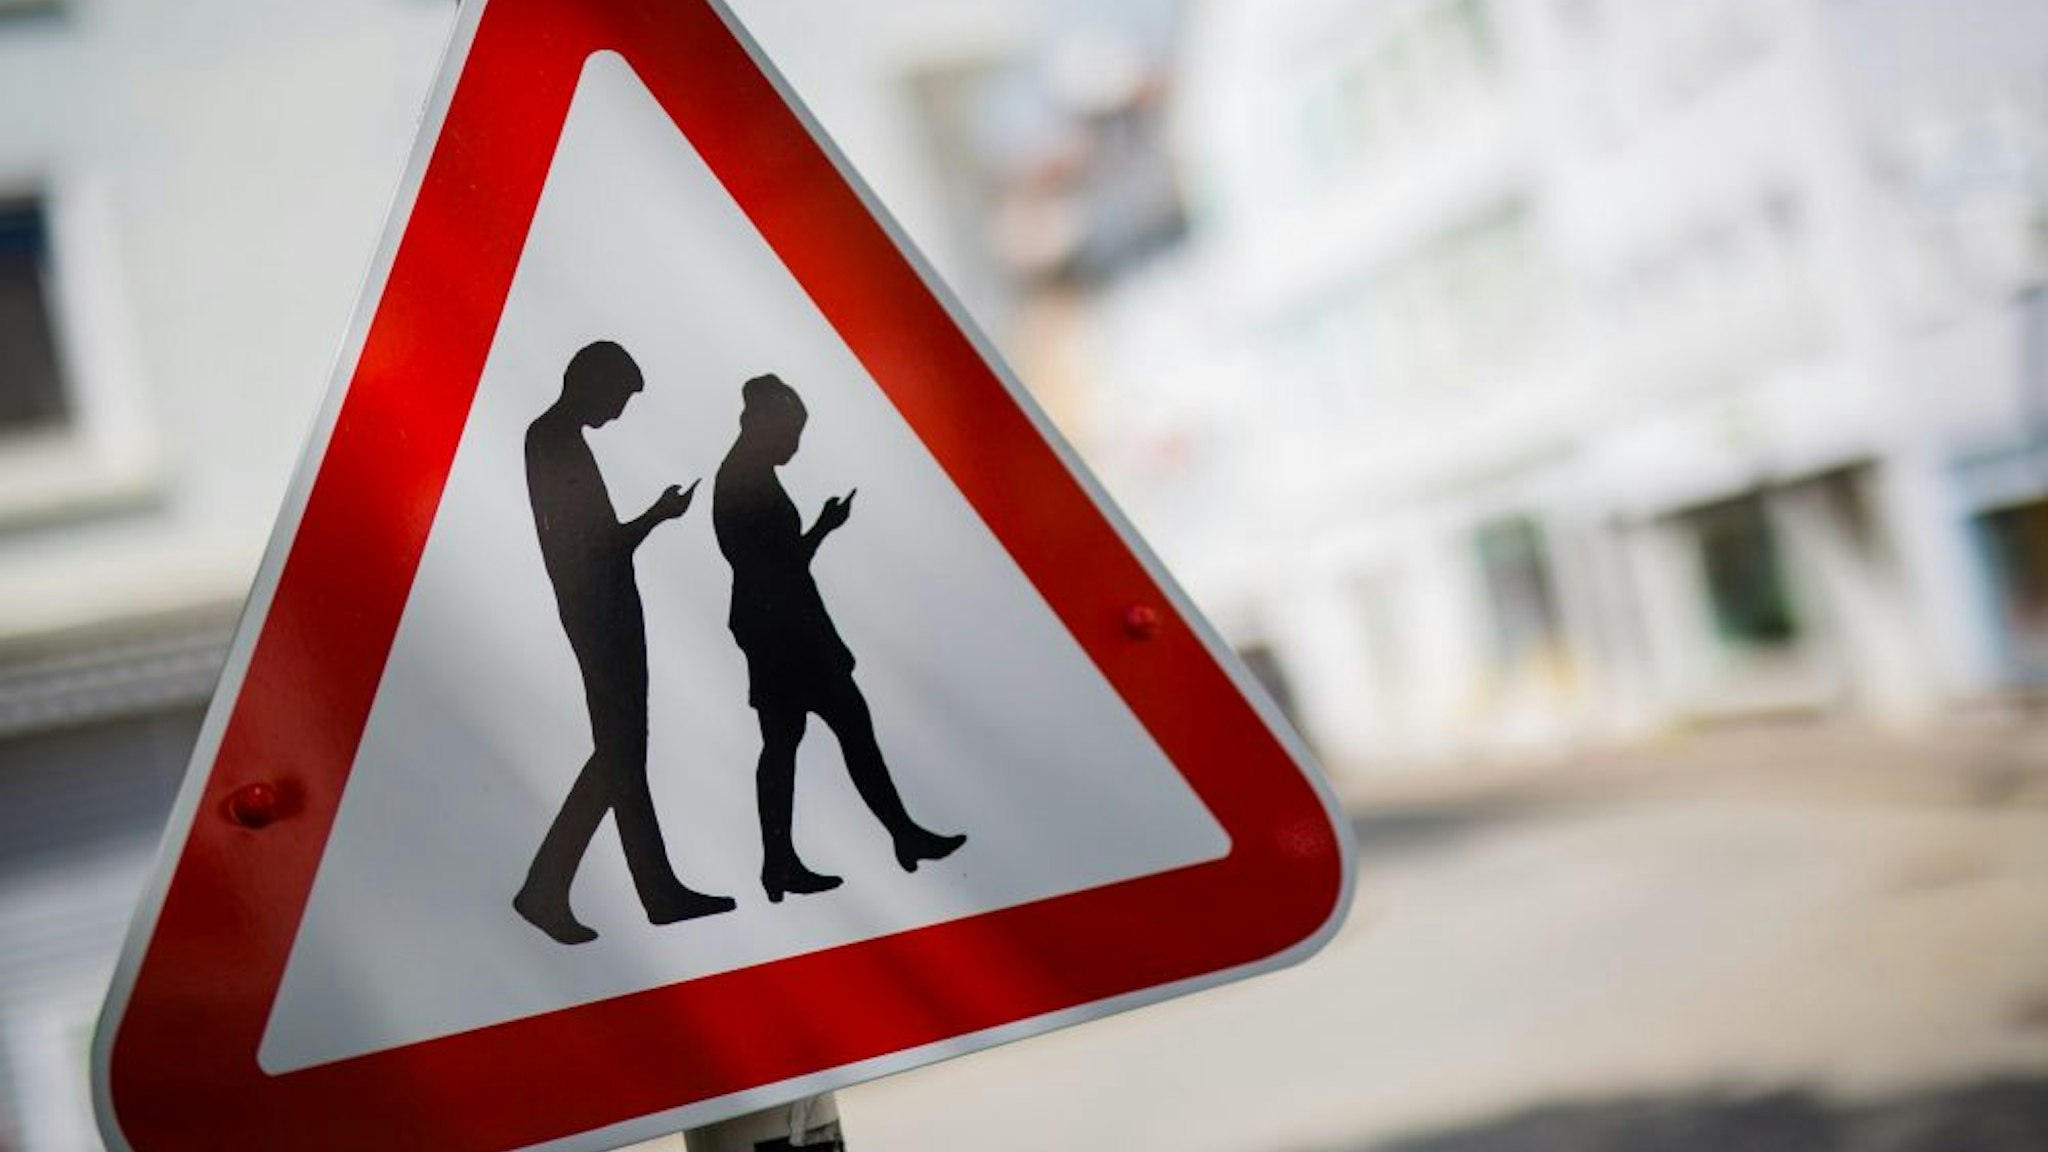 TOPSHOT - Picture taken on April 25, 2018 shows a modified caution sign warning against so-called "smombies", people watching their smartphones, in a street close to a school in Reutlingen, southern Germany. - The word "Smombie", a composition of "smartphone" and "zombie", describes people staring at their smartphones while walking around, even it it puts themselves and others in danger.